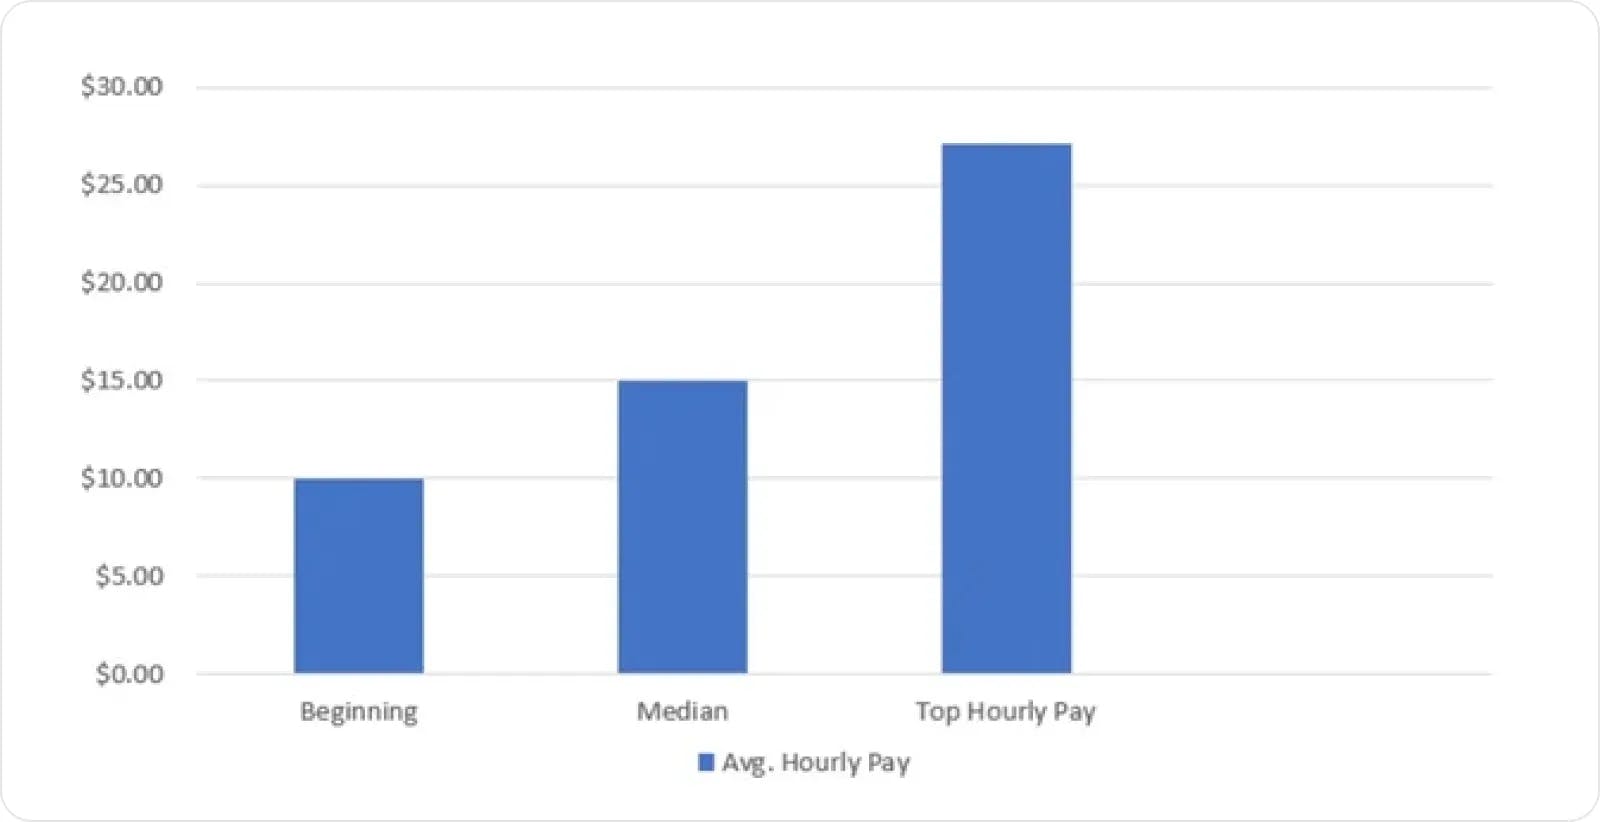 Average hourly pay in transcription